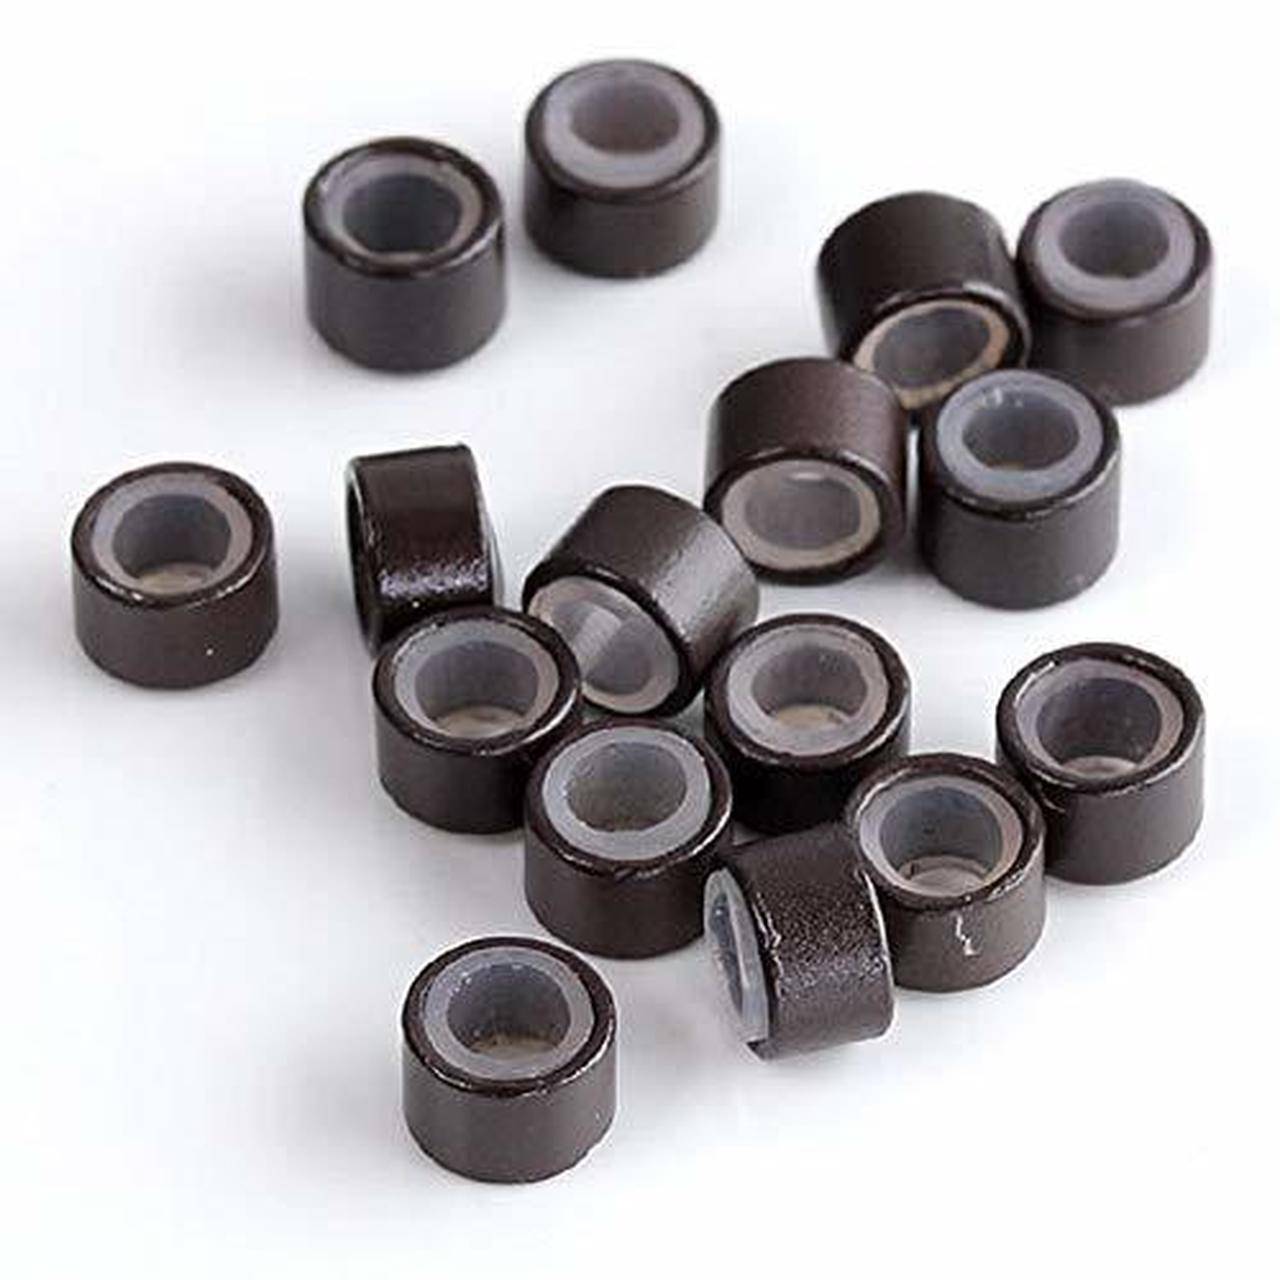 Copper Silicon Ring (Micro Link) 4.0 x 3.5 x 3.0 mm (1000 pcs)-B - VIP Extensions